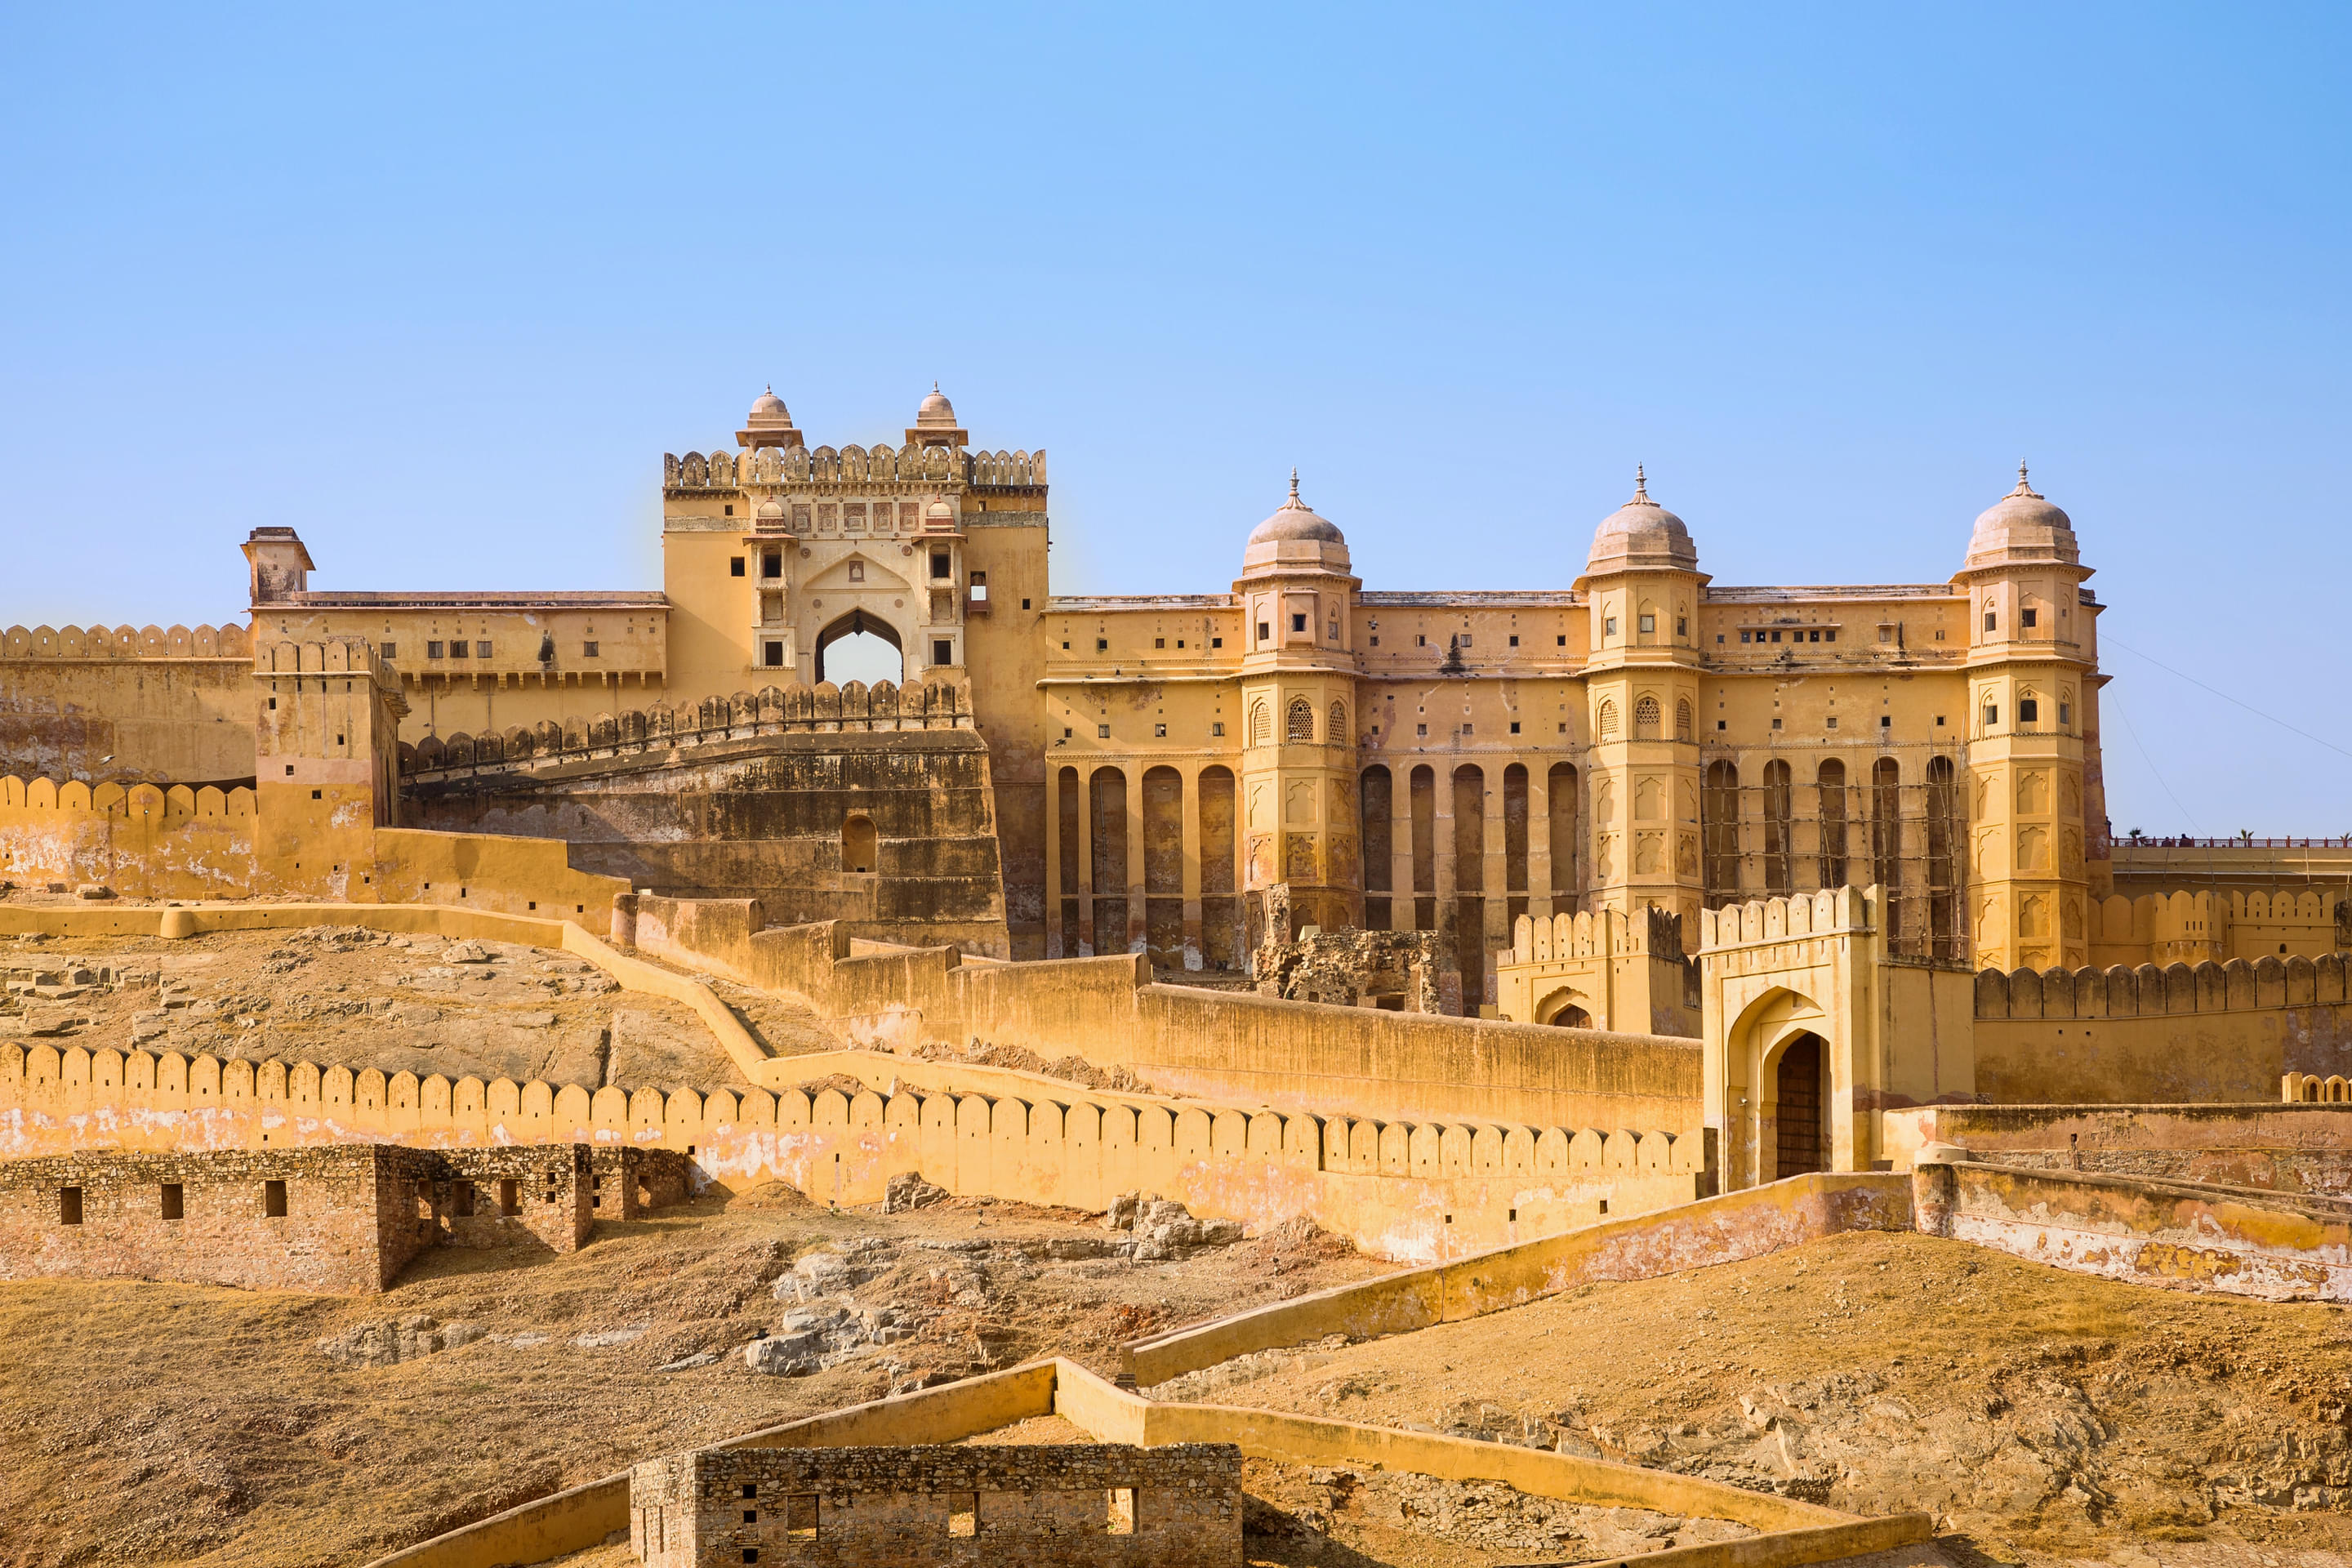 Amer Fort Overview